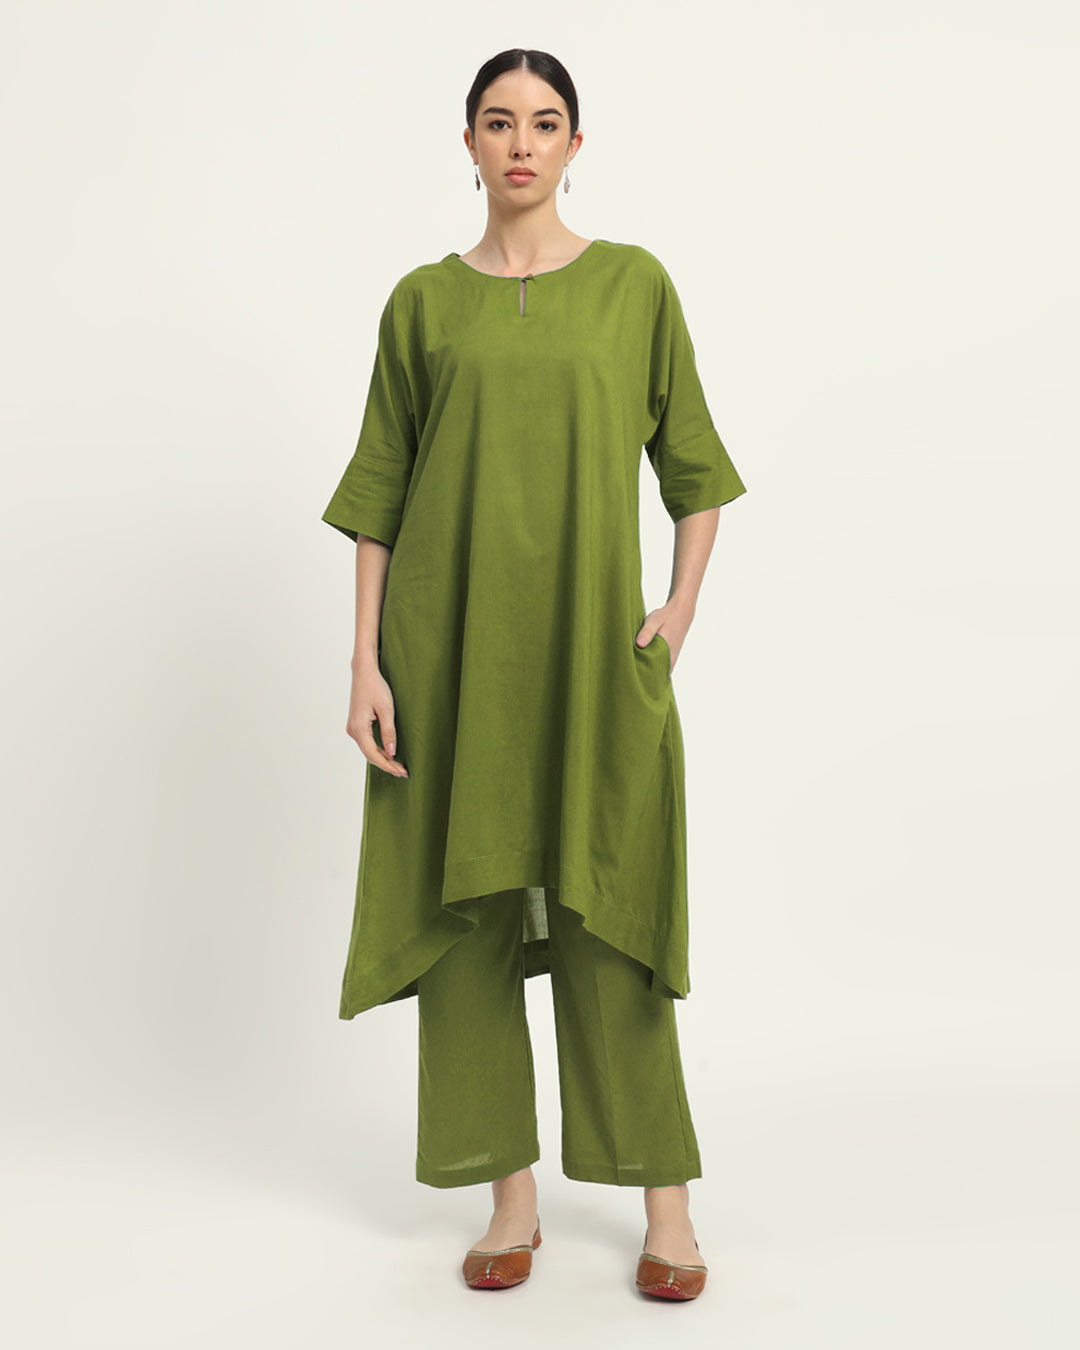 Combo: Lilac & Sage Green Flare & Flow Boat Neck Solid Kurta